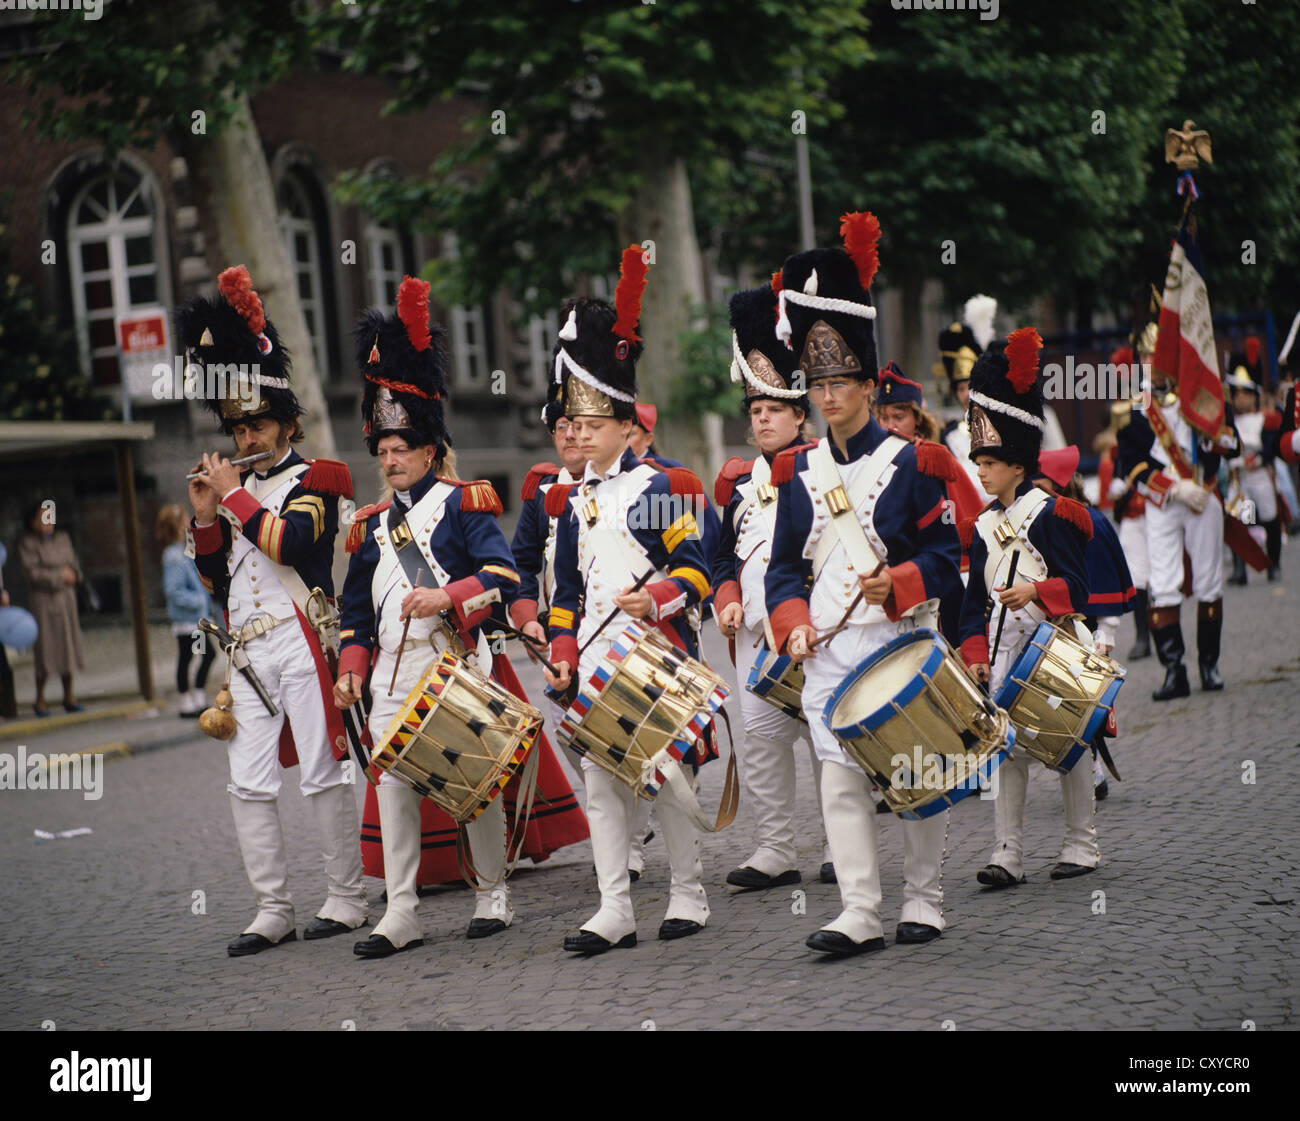 Belgium. Folklore Festival. Military drum band marching in period costume. Stock Photo